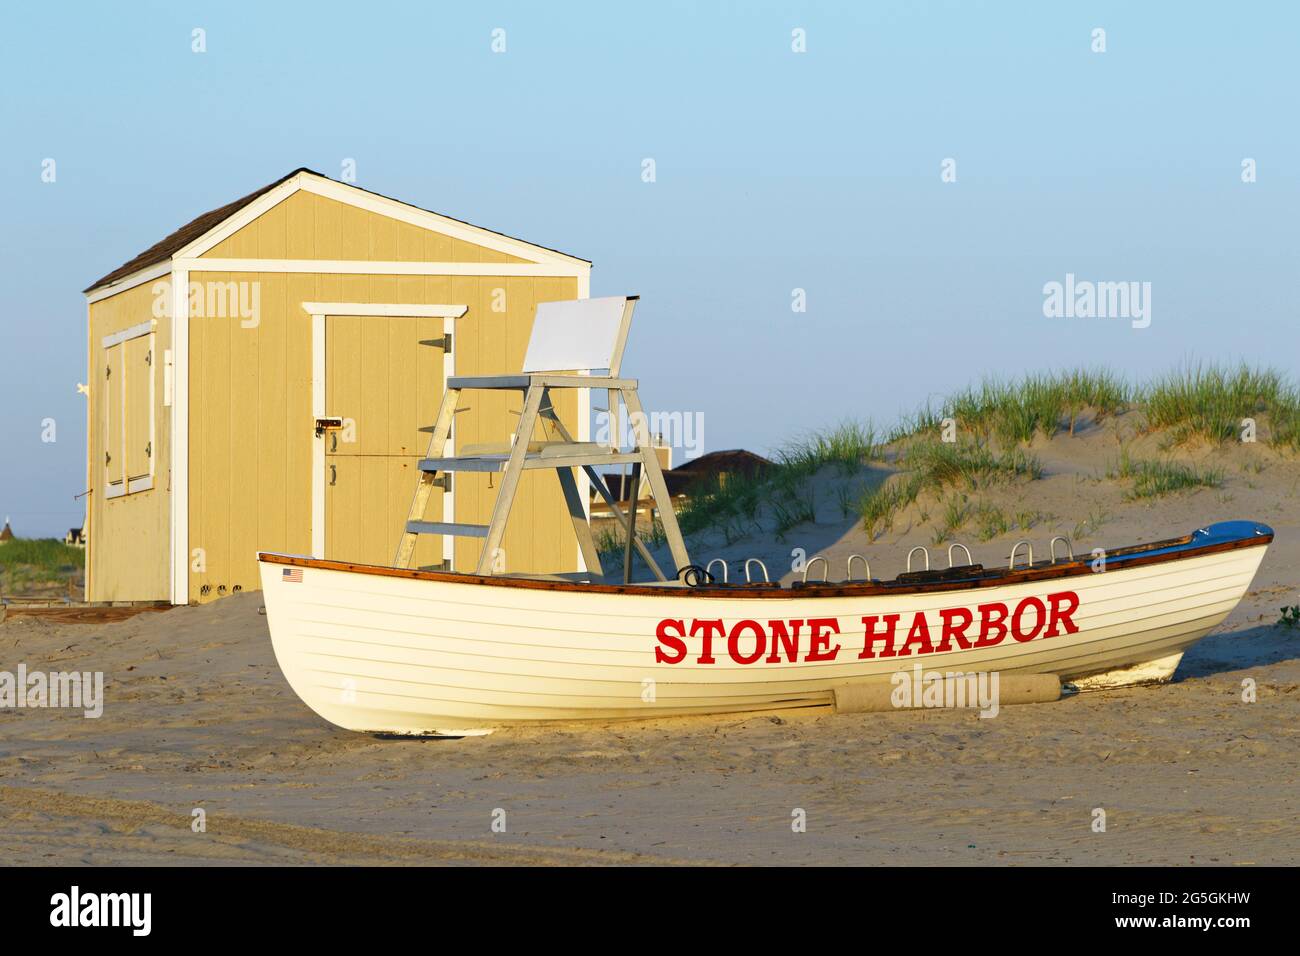 A Stone Harbor lifeboat on the beach ready for the days activities. Stone Harbor is a popular seaside resort on Seven Mile Island in Cape May County Stock Photo